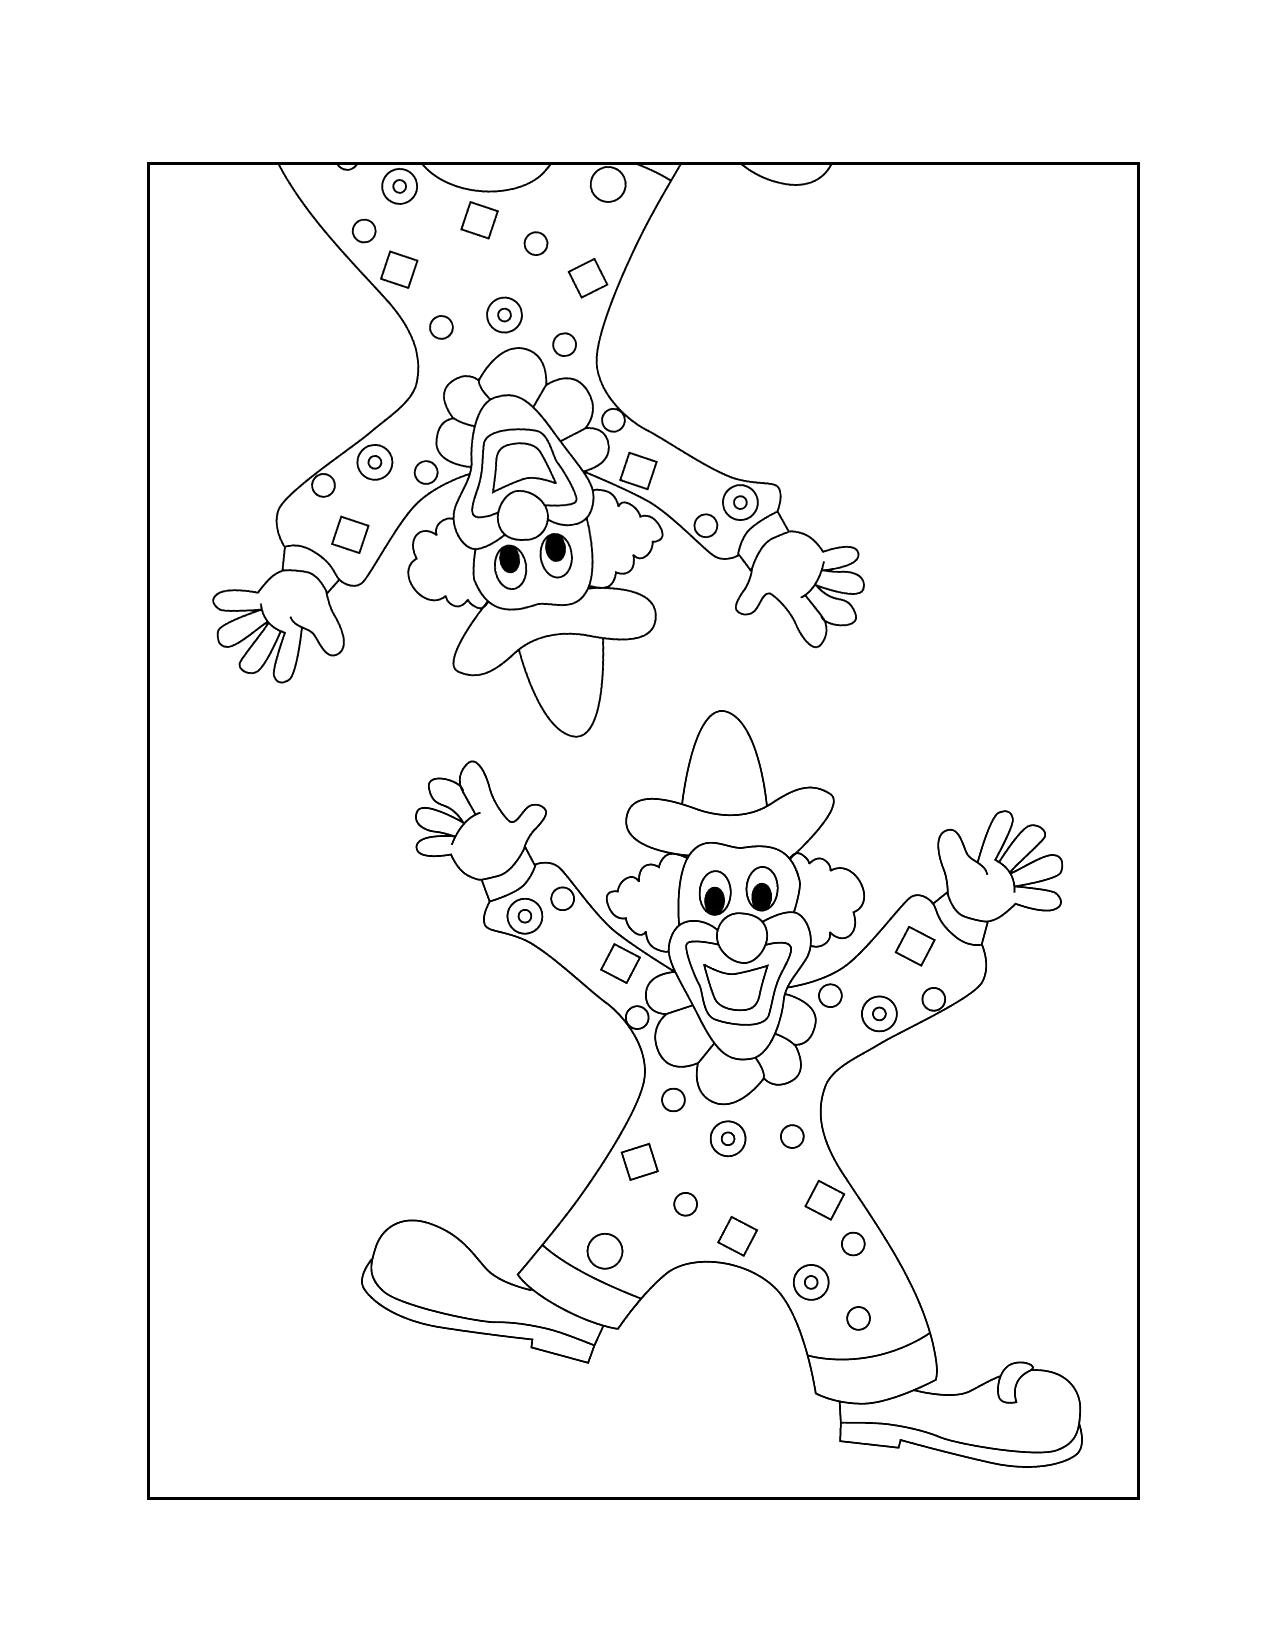 Happy Clowns Coloring Page